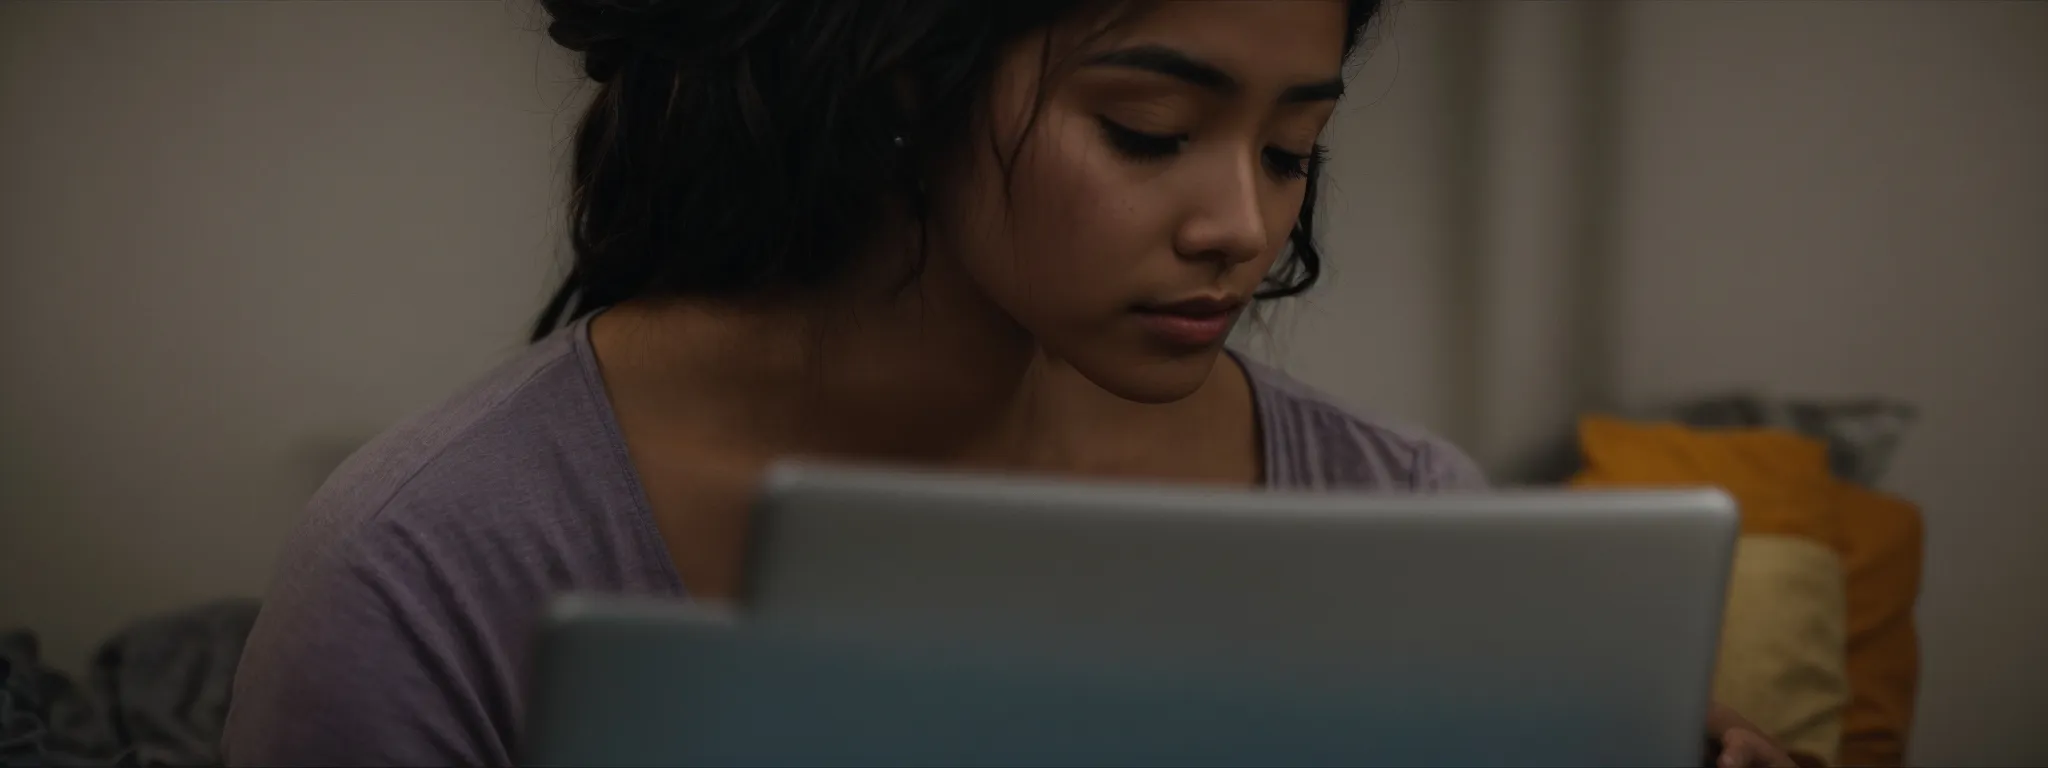 a student intently focusing on an online course displayed on a laptop.